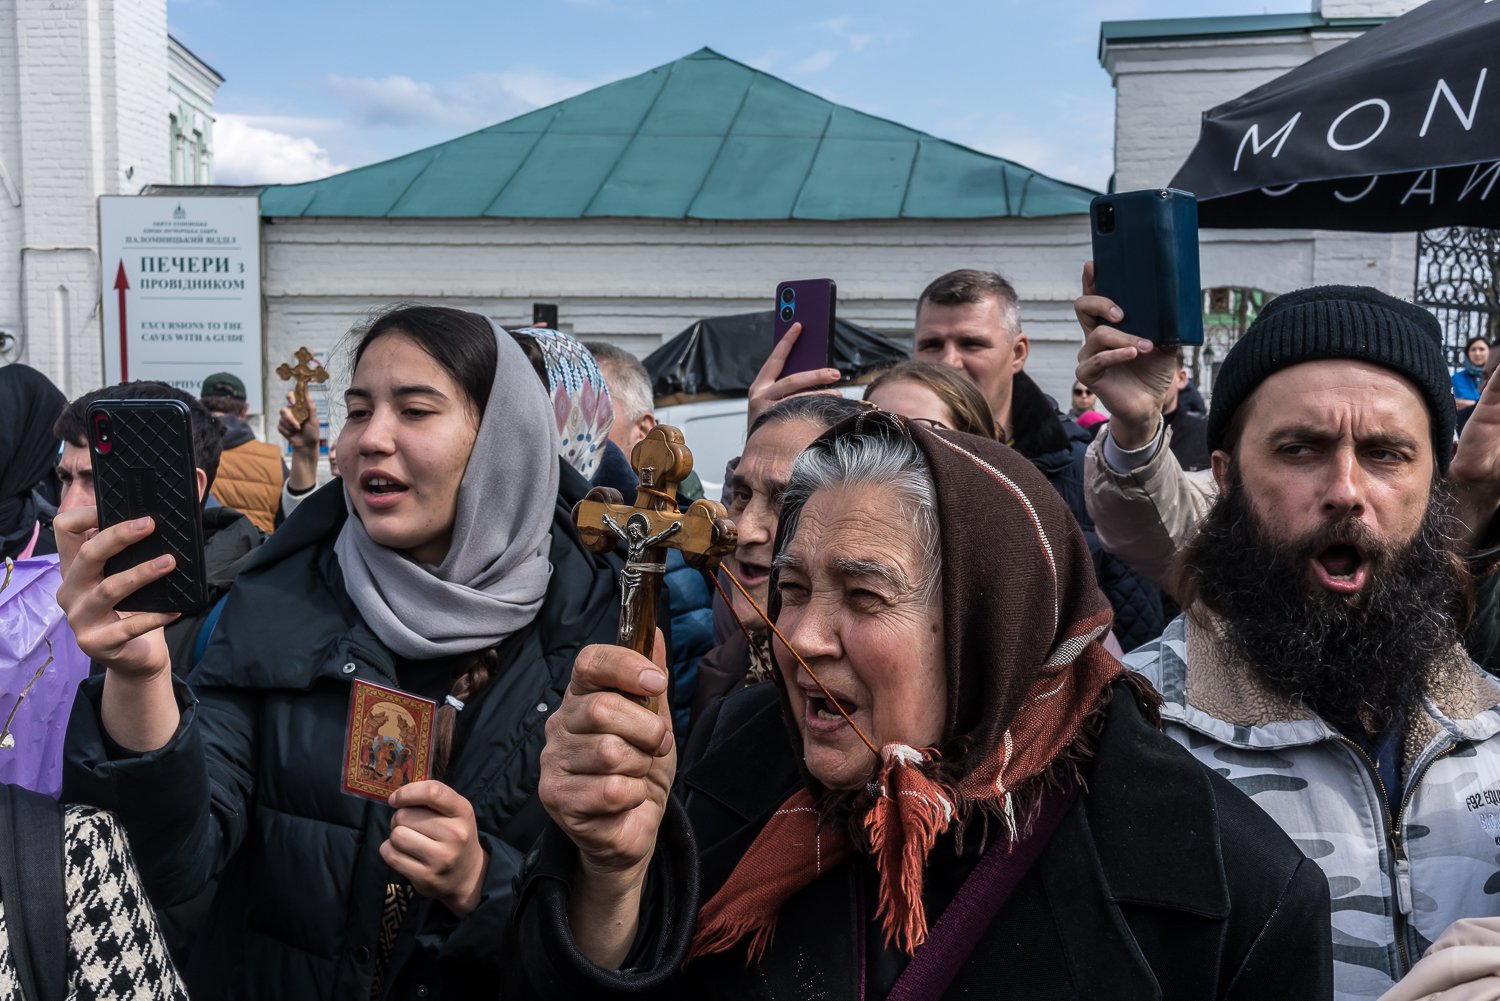  Worshippers rally in support of the Kyiv-Pechersk Lavra, a thousand-year-old Orthodox Religious complex, that has been under investigation by the Ukrainian authorities over its ties to Russia and the Russian Orthodox Church, on Palm Sunday, one week